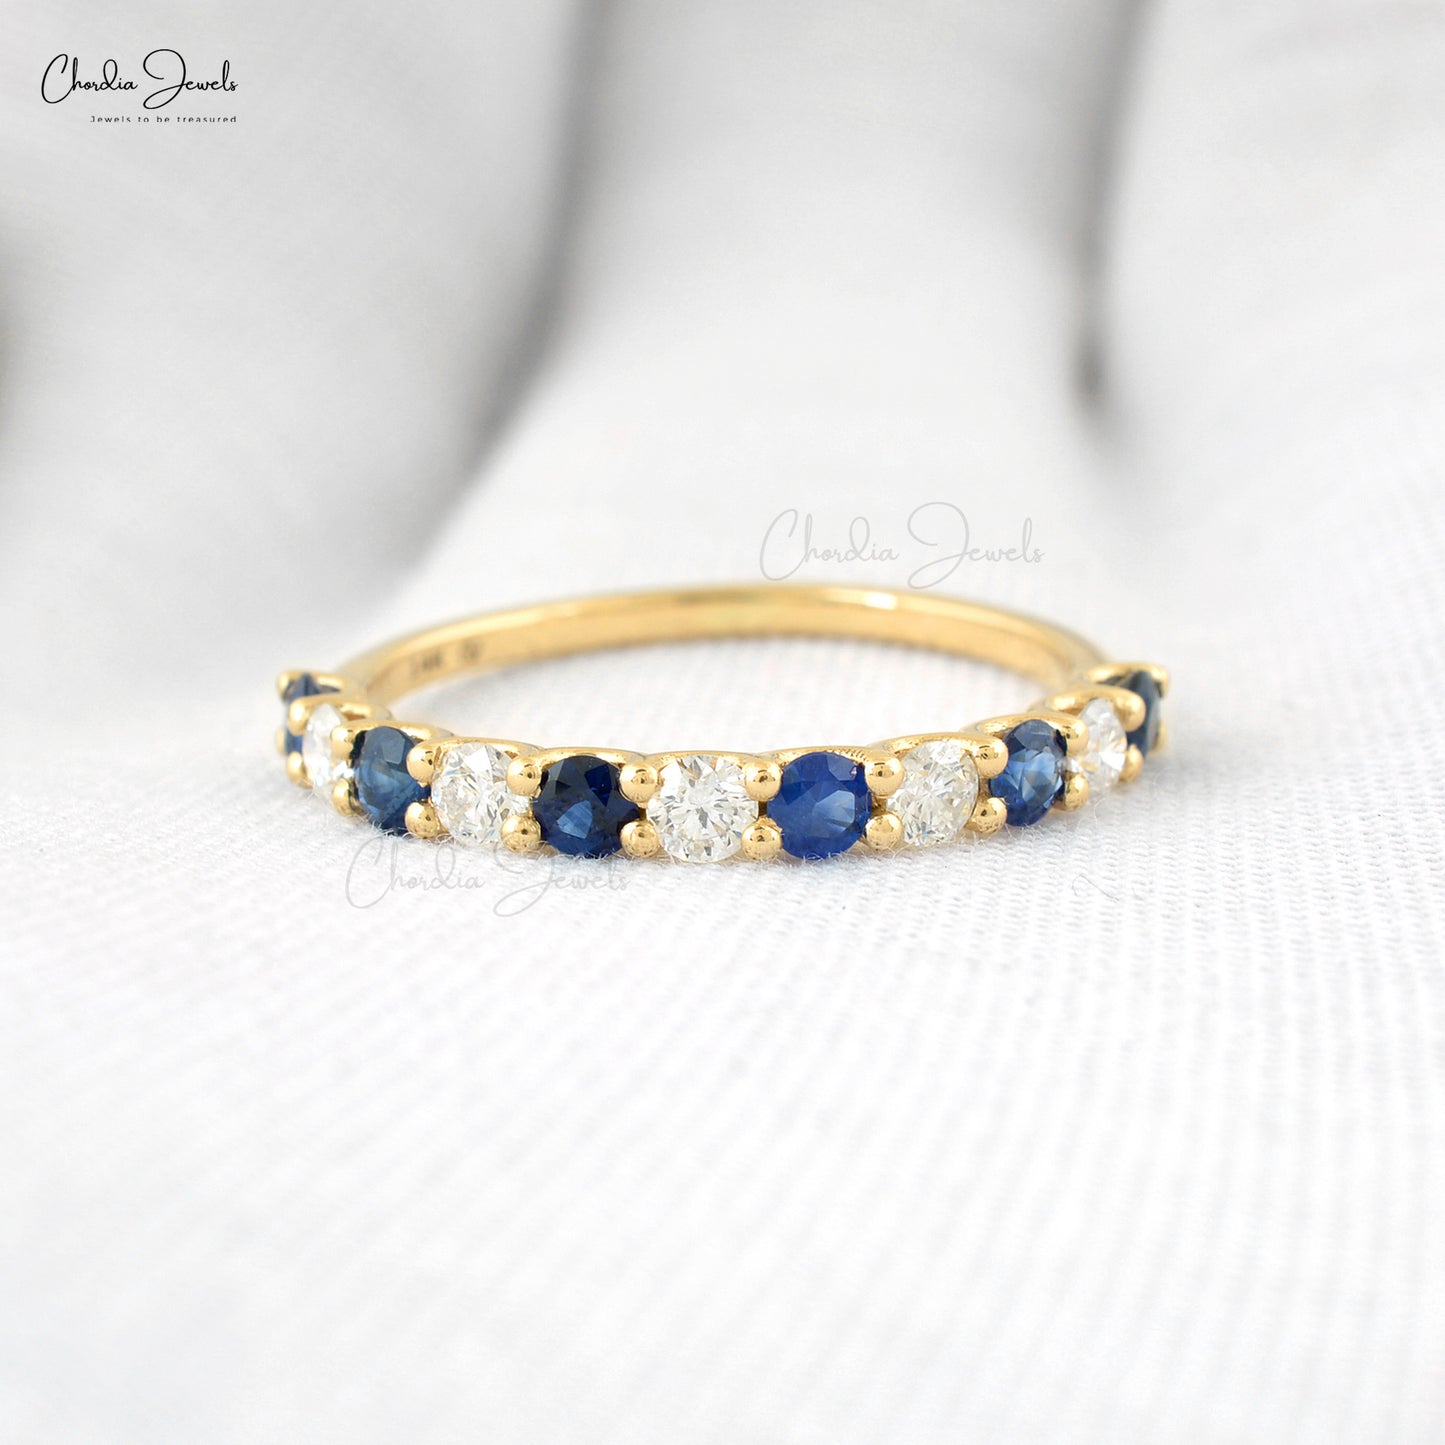 Natural Blue Sapphire Half Eternity Band 2.5mm Round Gemstone 14k Solid Yellow Gold Diamond Eternity Ring For Her